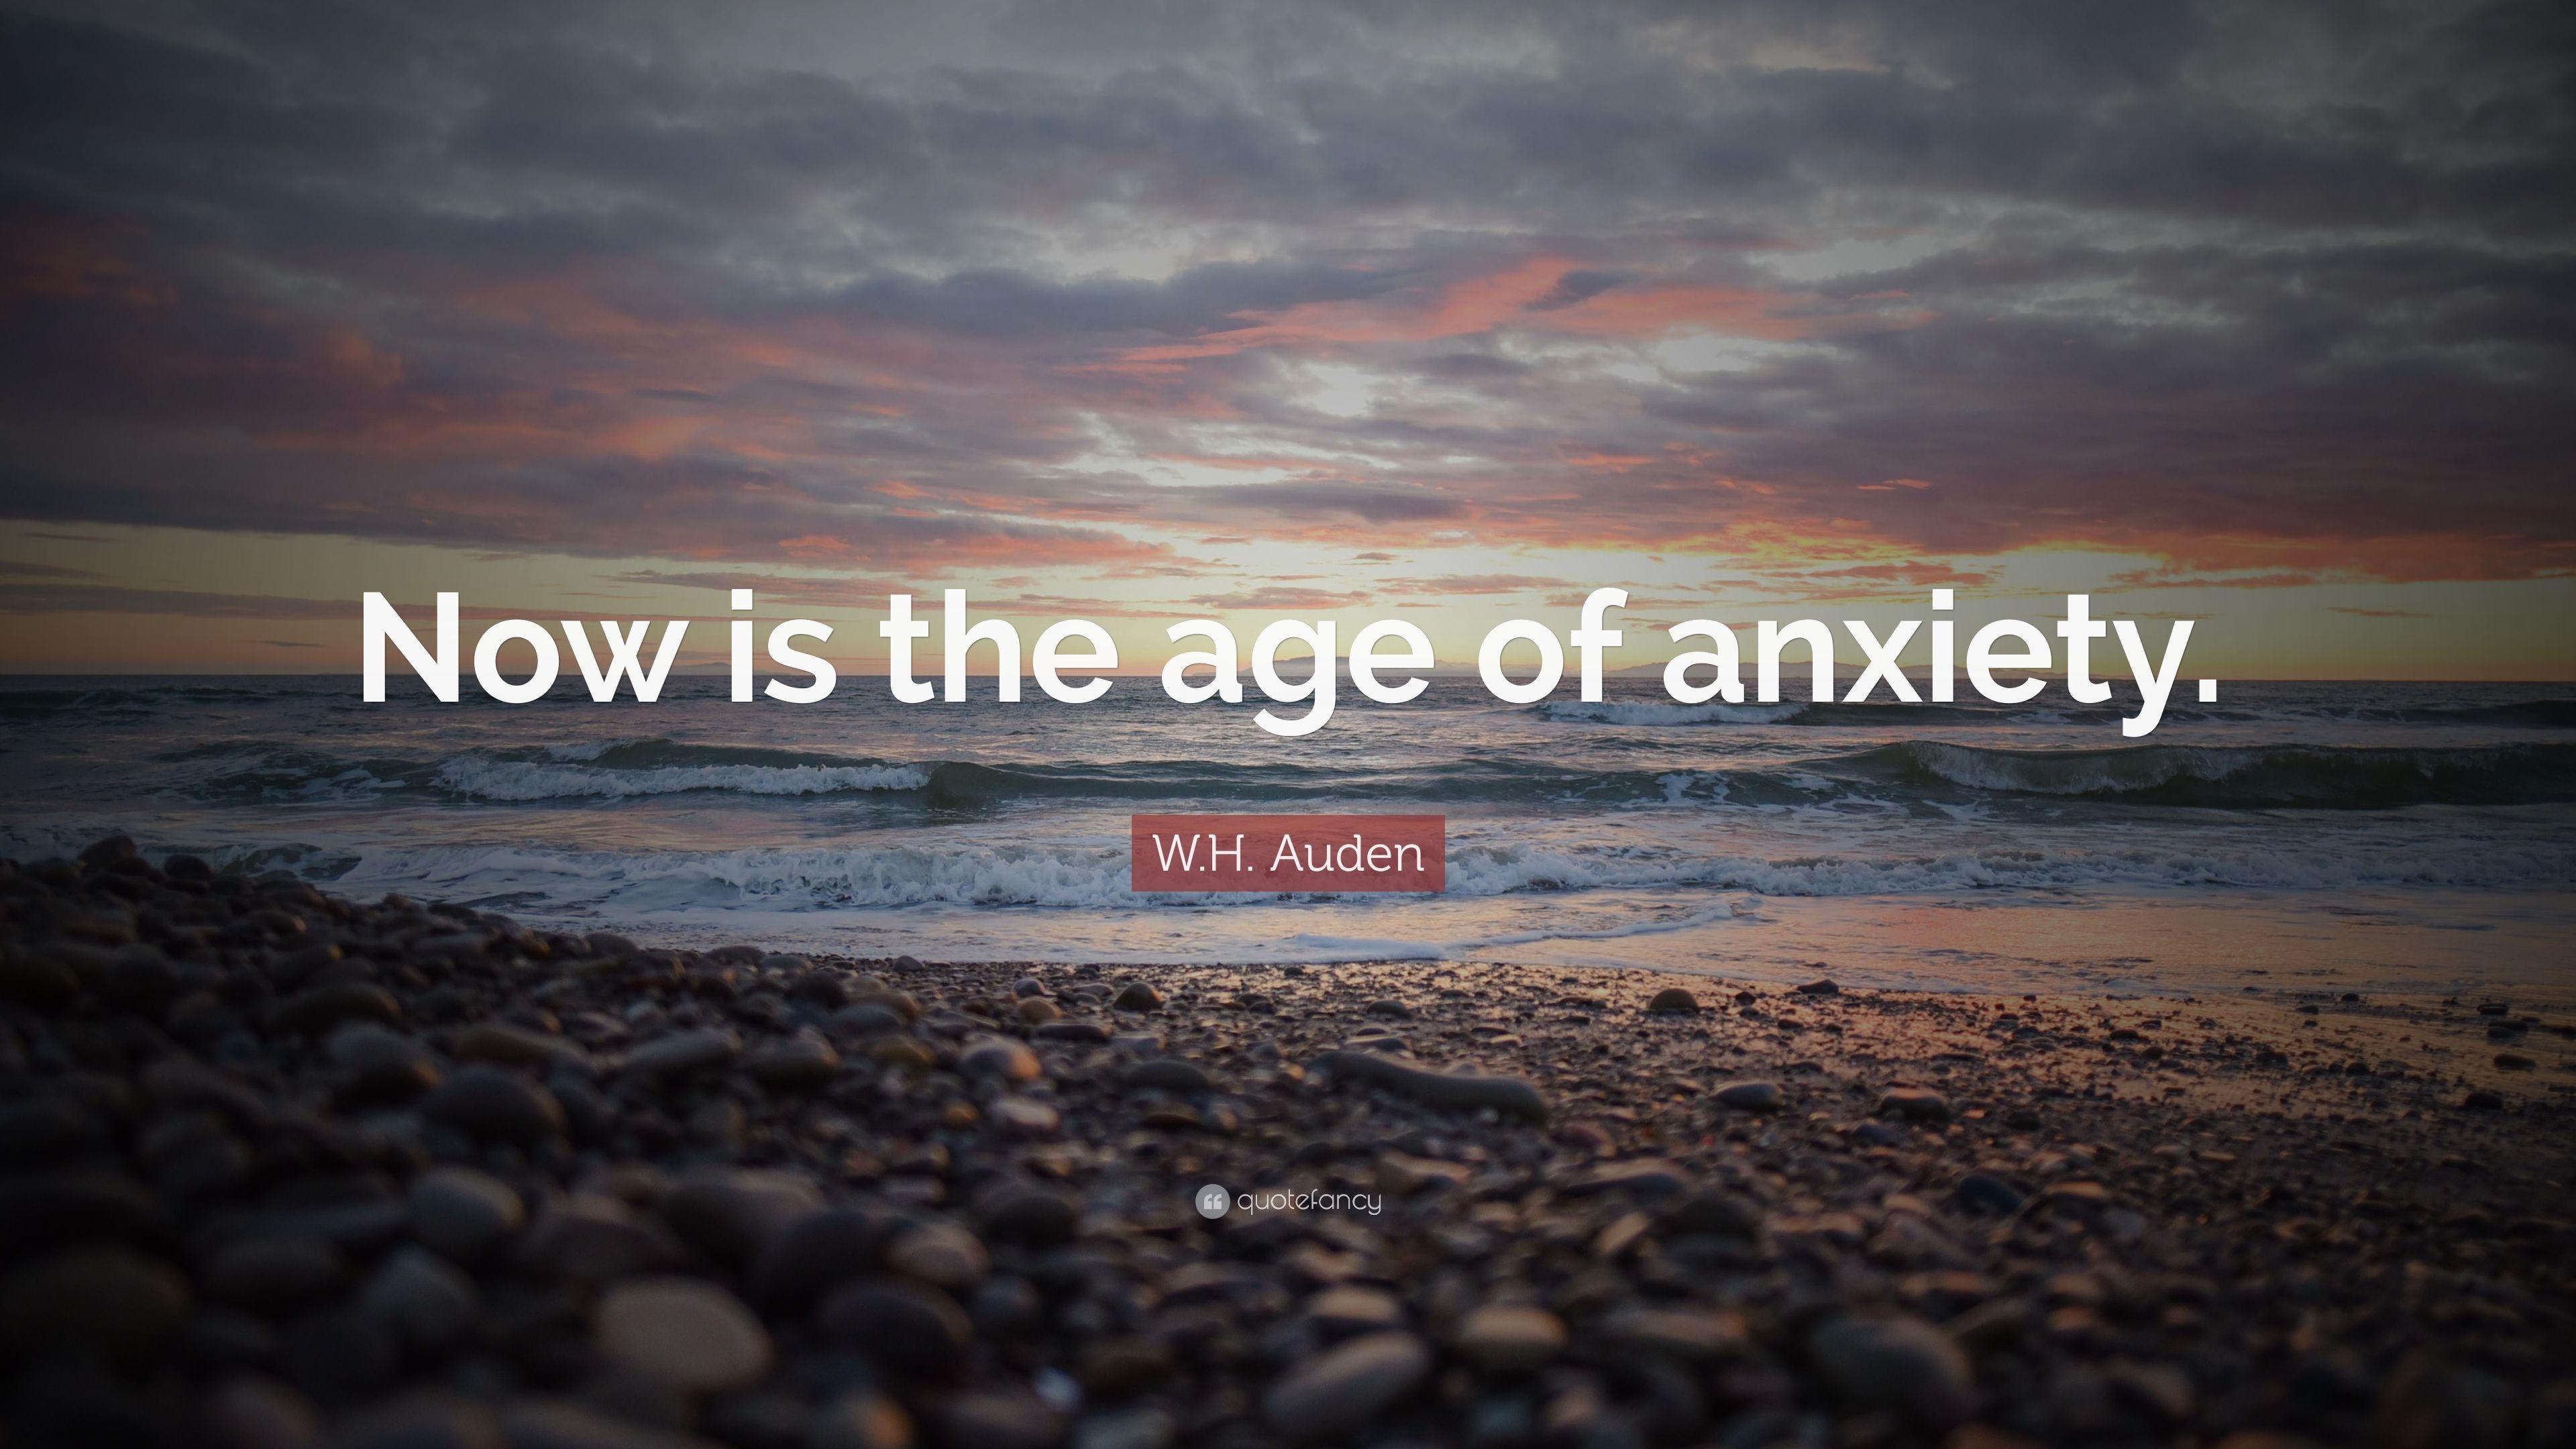 W.H. Auden Quote: “Now is the age of anxiety.” 7 wallpaper